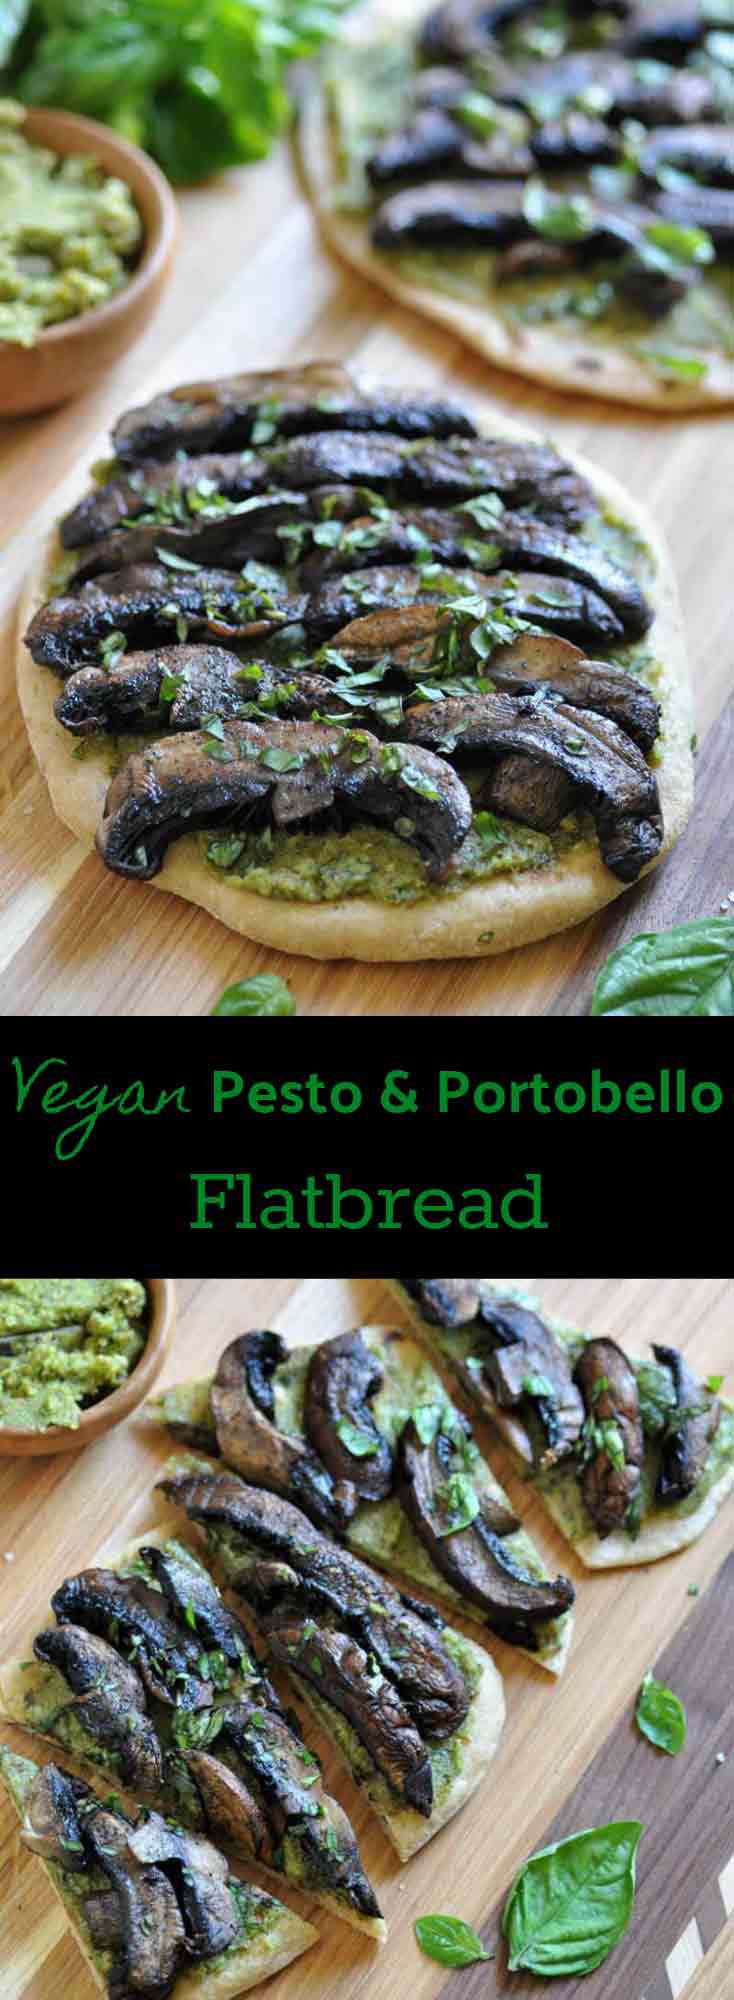 Homemade flatbread smothered in pesto and Portobello mushrooms. A delicious, healthy, and easy dinner.